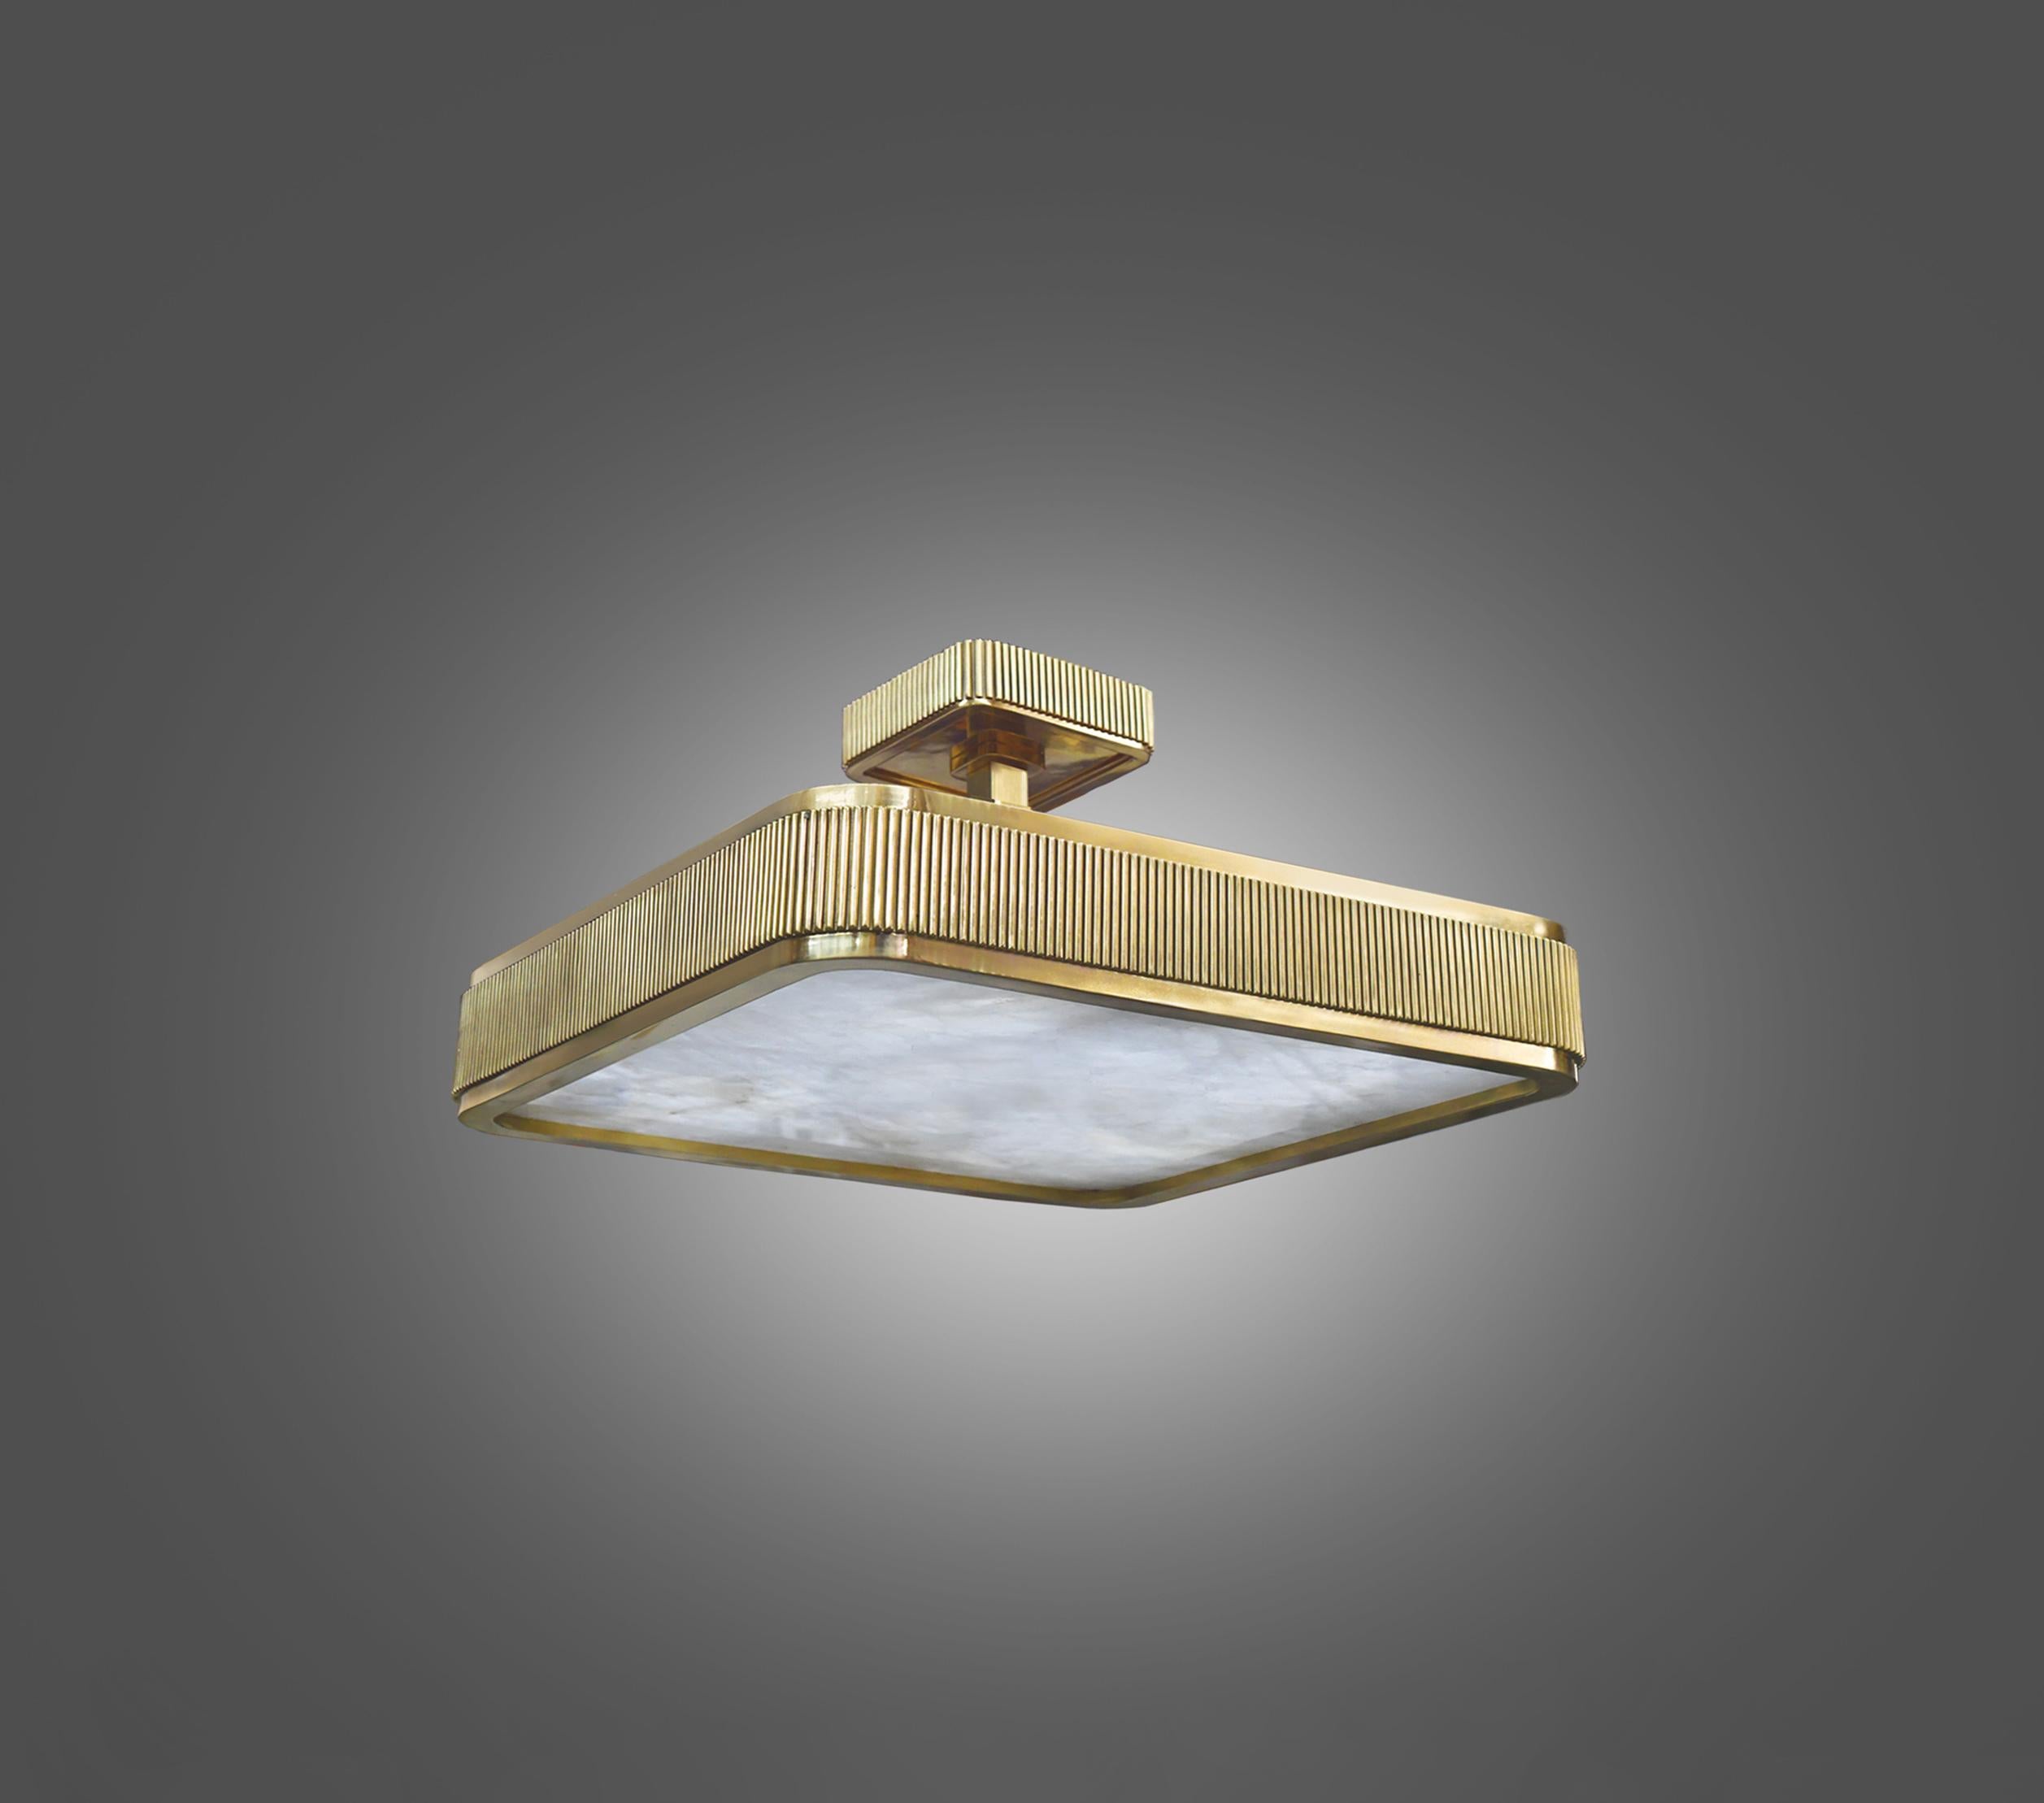 Elegant form polished brass frame with rock crystal panel, BSO rock crystal semi flushmount. Created by Phoenix, NYC.

Lutron dimmer system. 
Each fixture installs four E26 base sockets. 
Use four 60W each LED light bulb. (240W total)

Quantity and